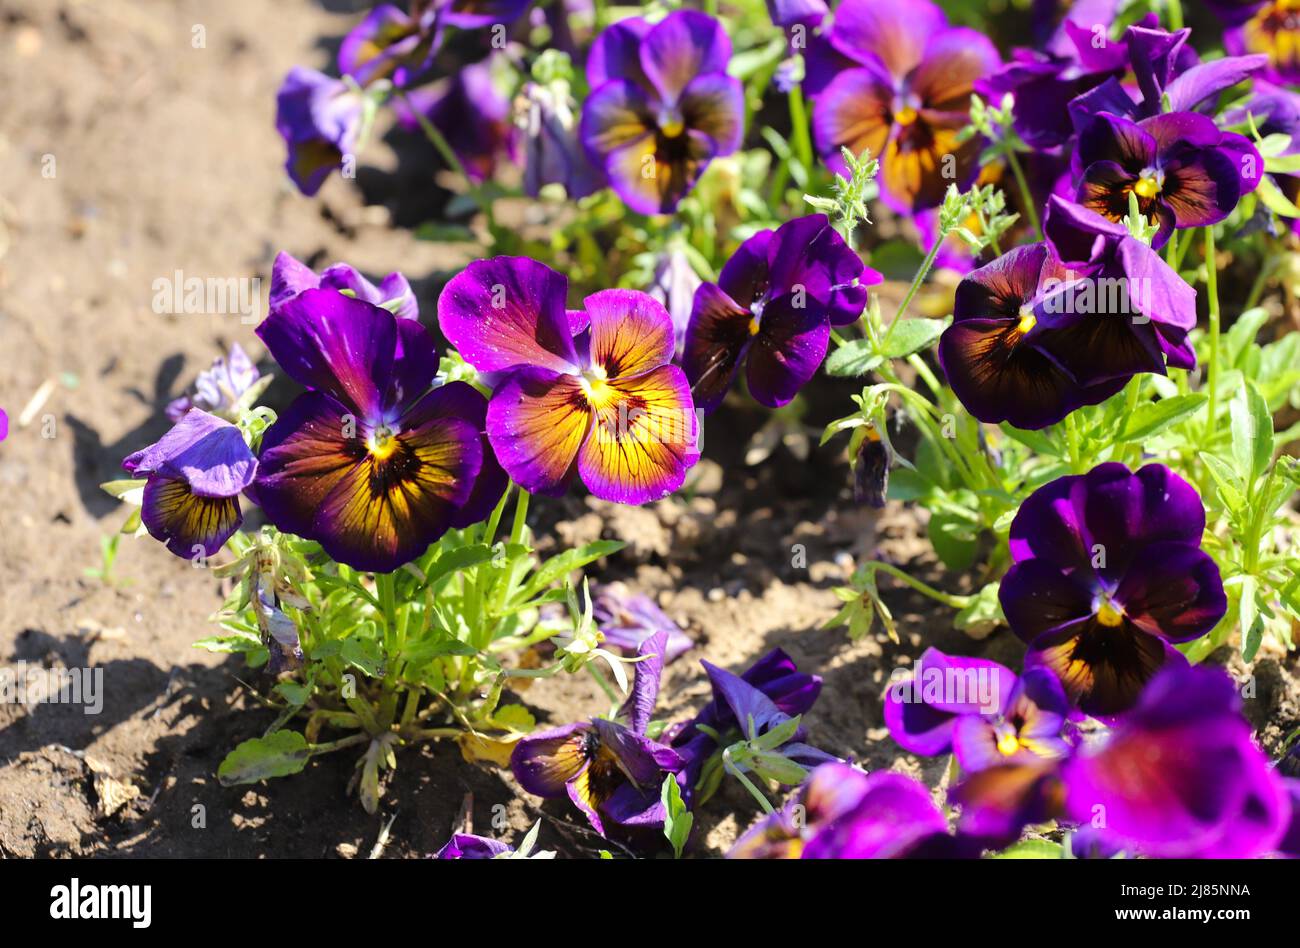 Colorful violets outdoor in garden Stock Photo